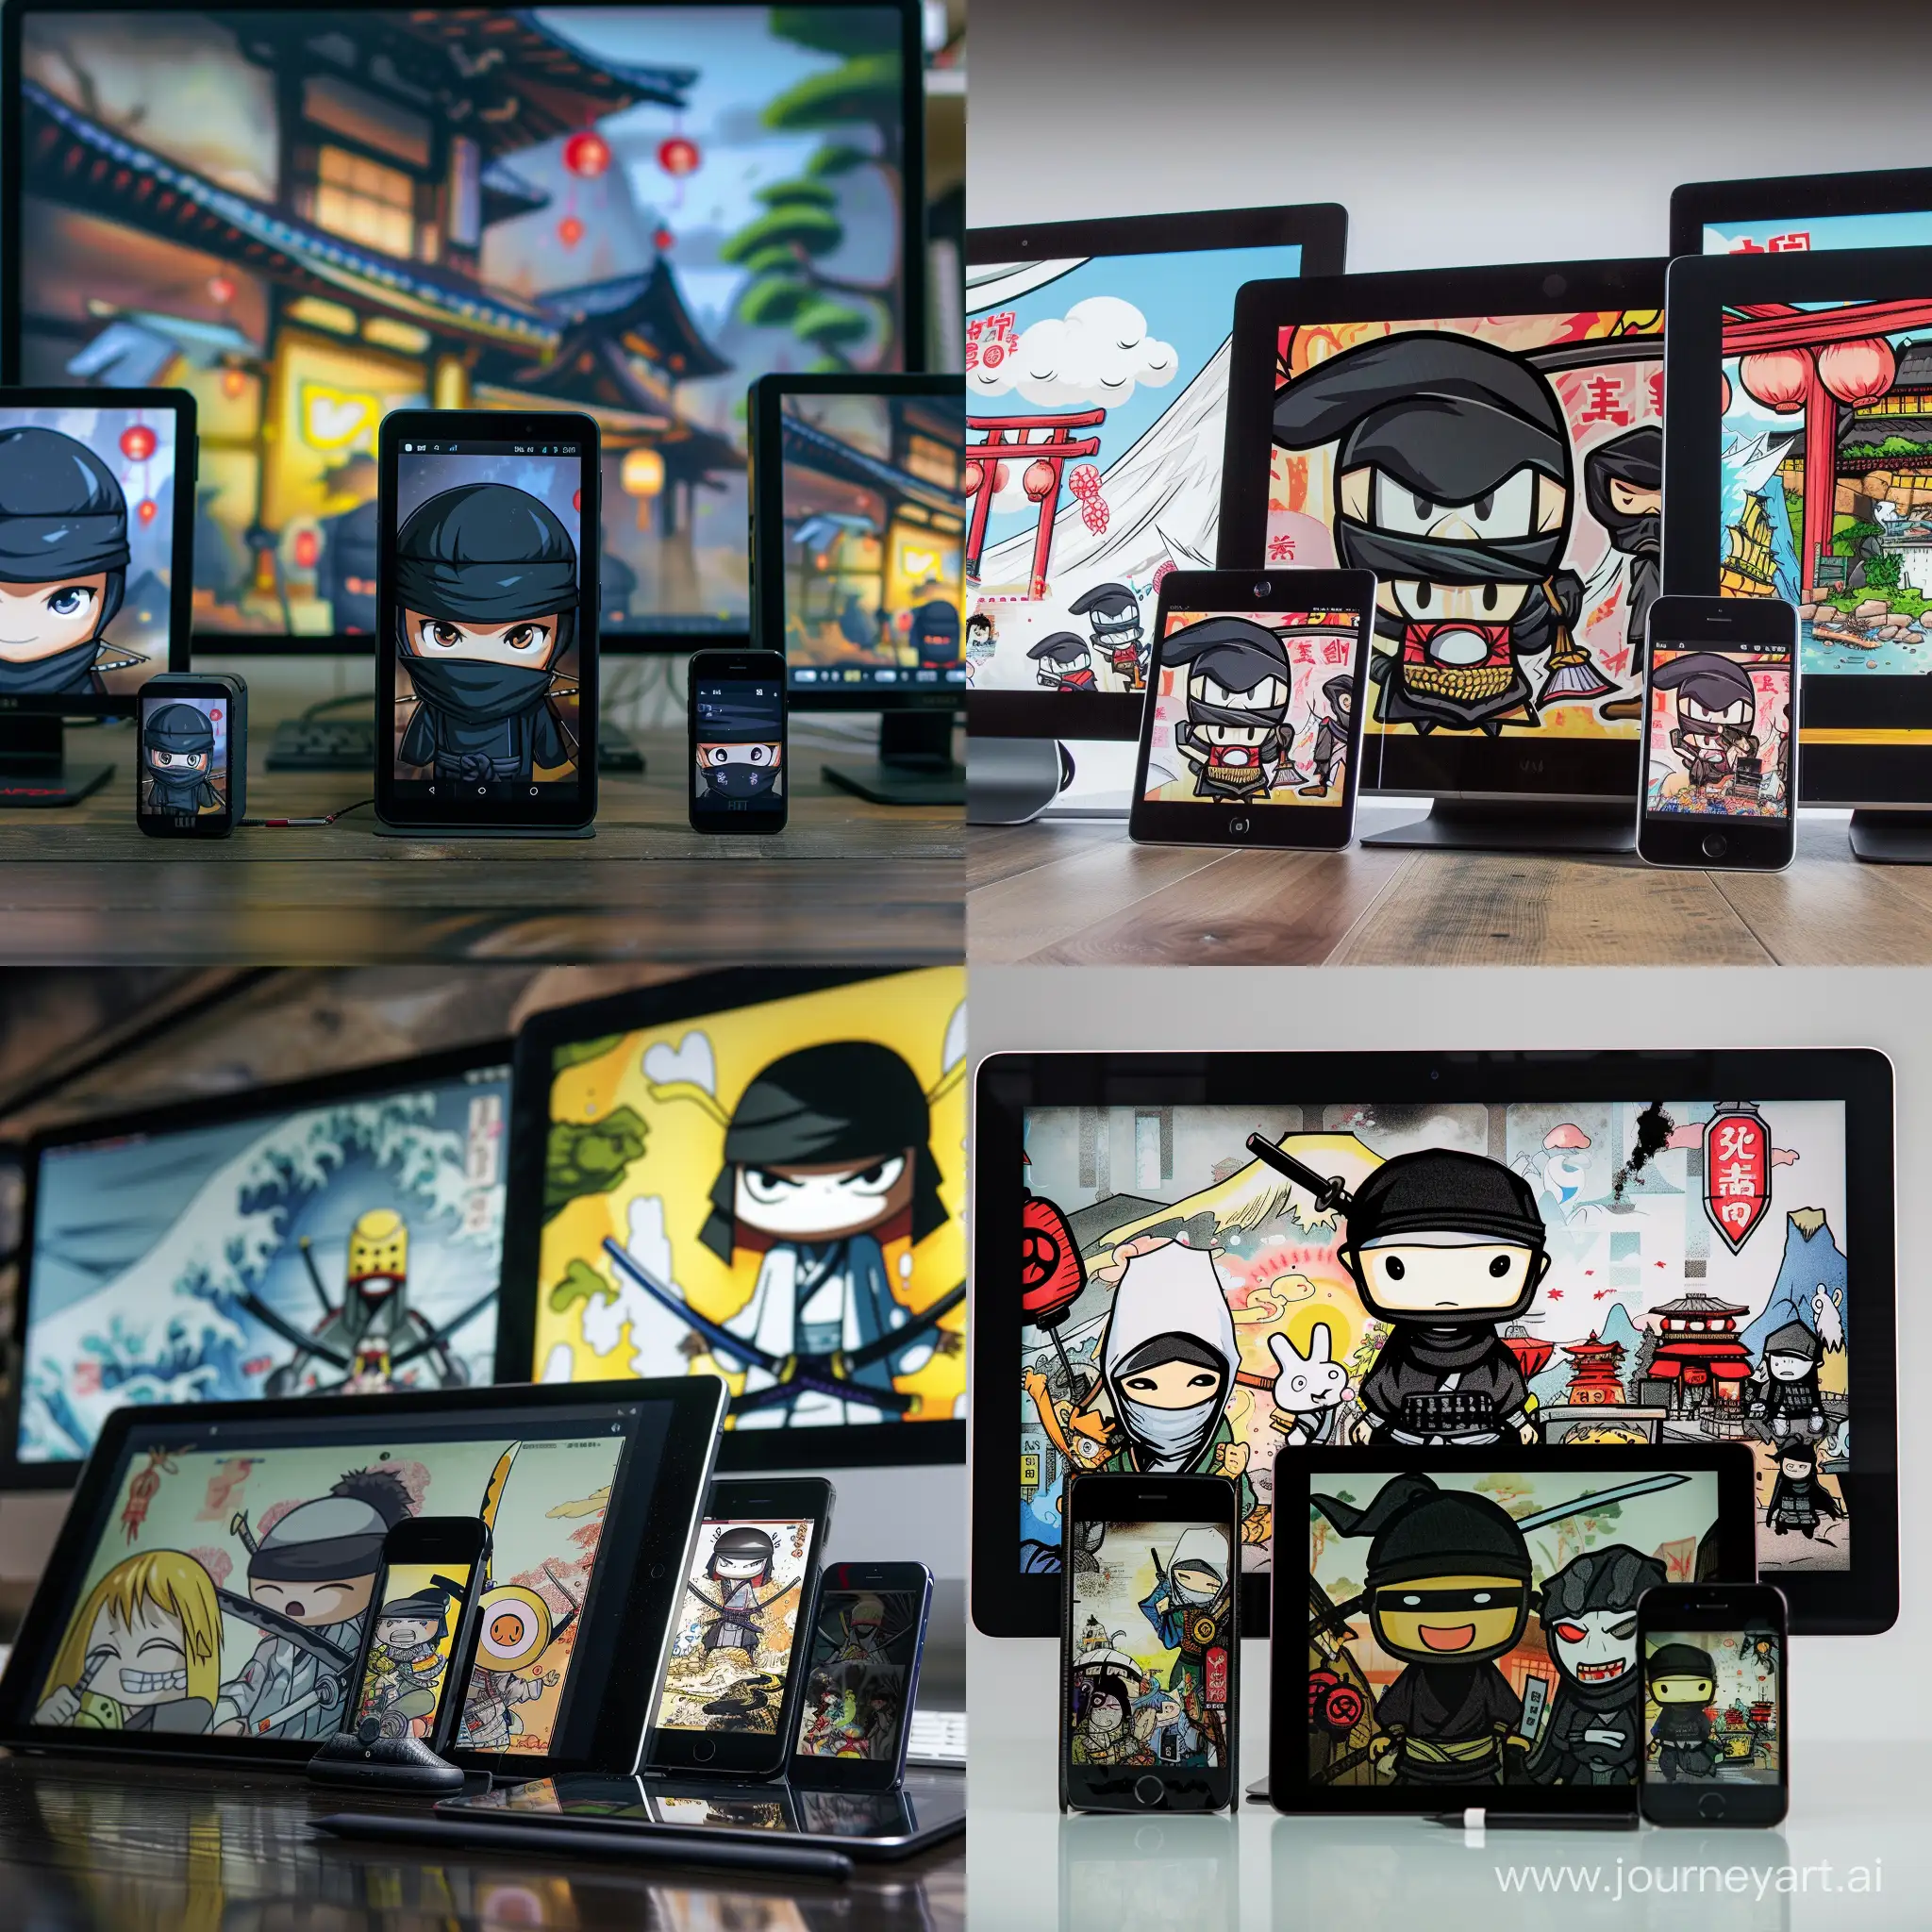 image of tablet, mobile and monitor screen in a row showing cartoon of ninja hattori, doremon and anime